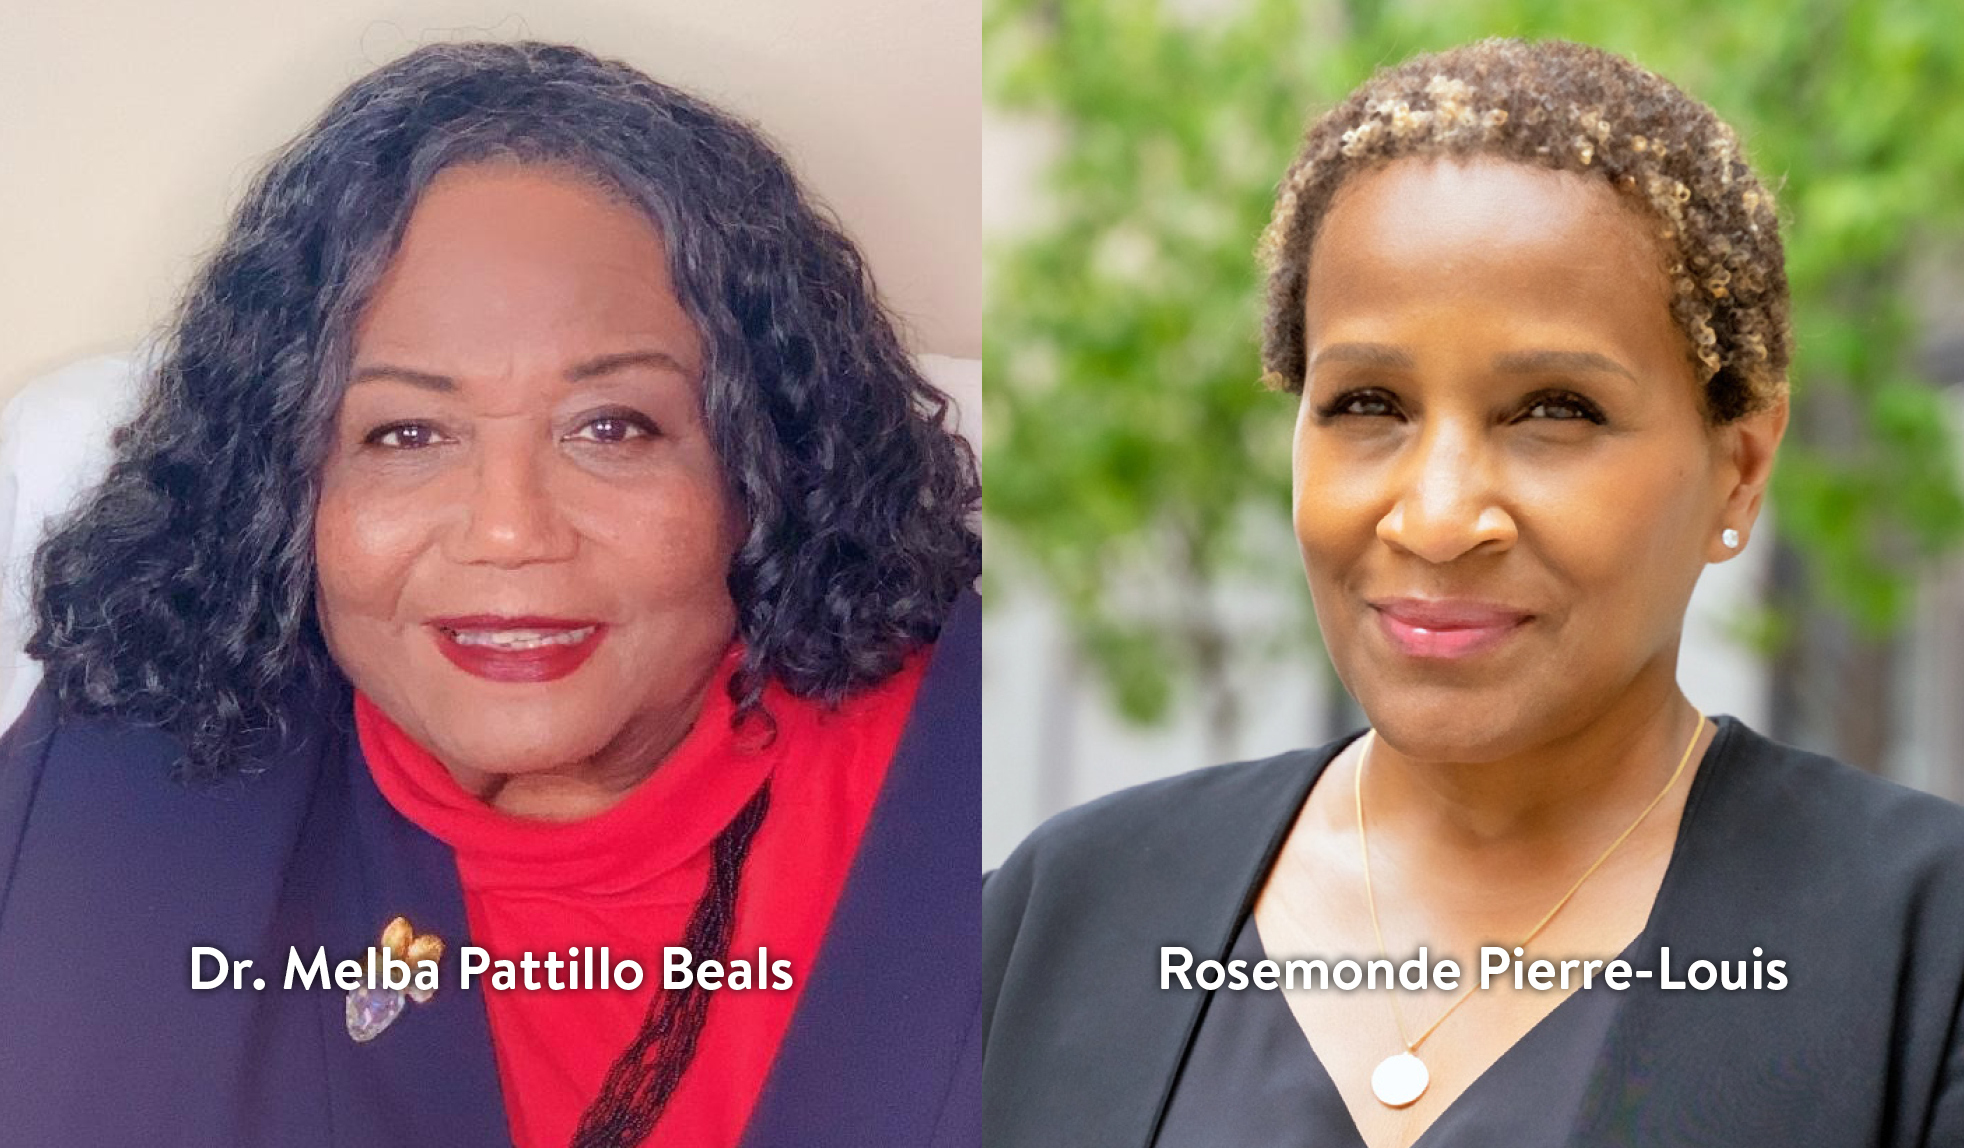 As part of our MLK celebration, watch this virtual talk with Dr. Melba Pattillo Beals and Rosemonde Pierre-Louis.